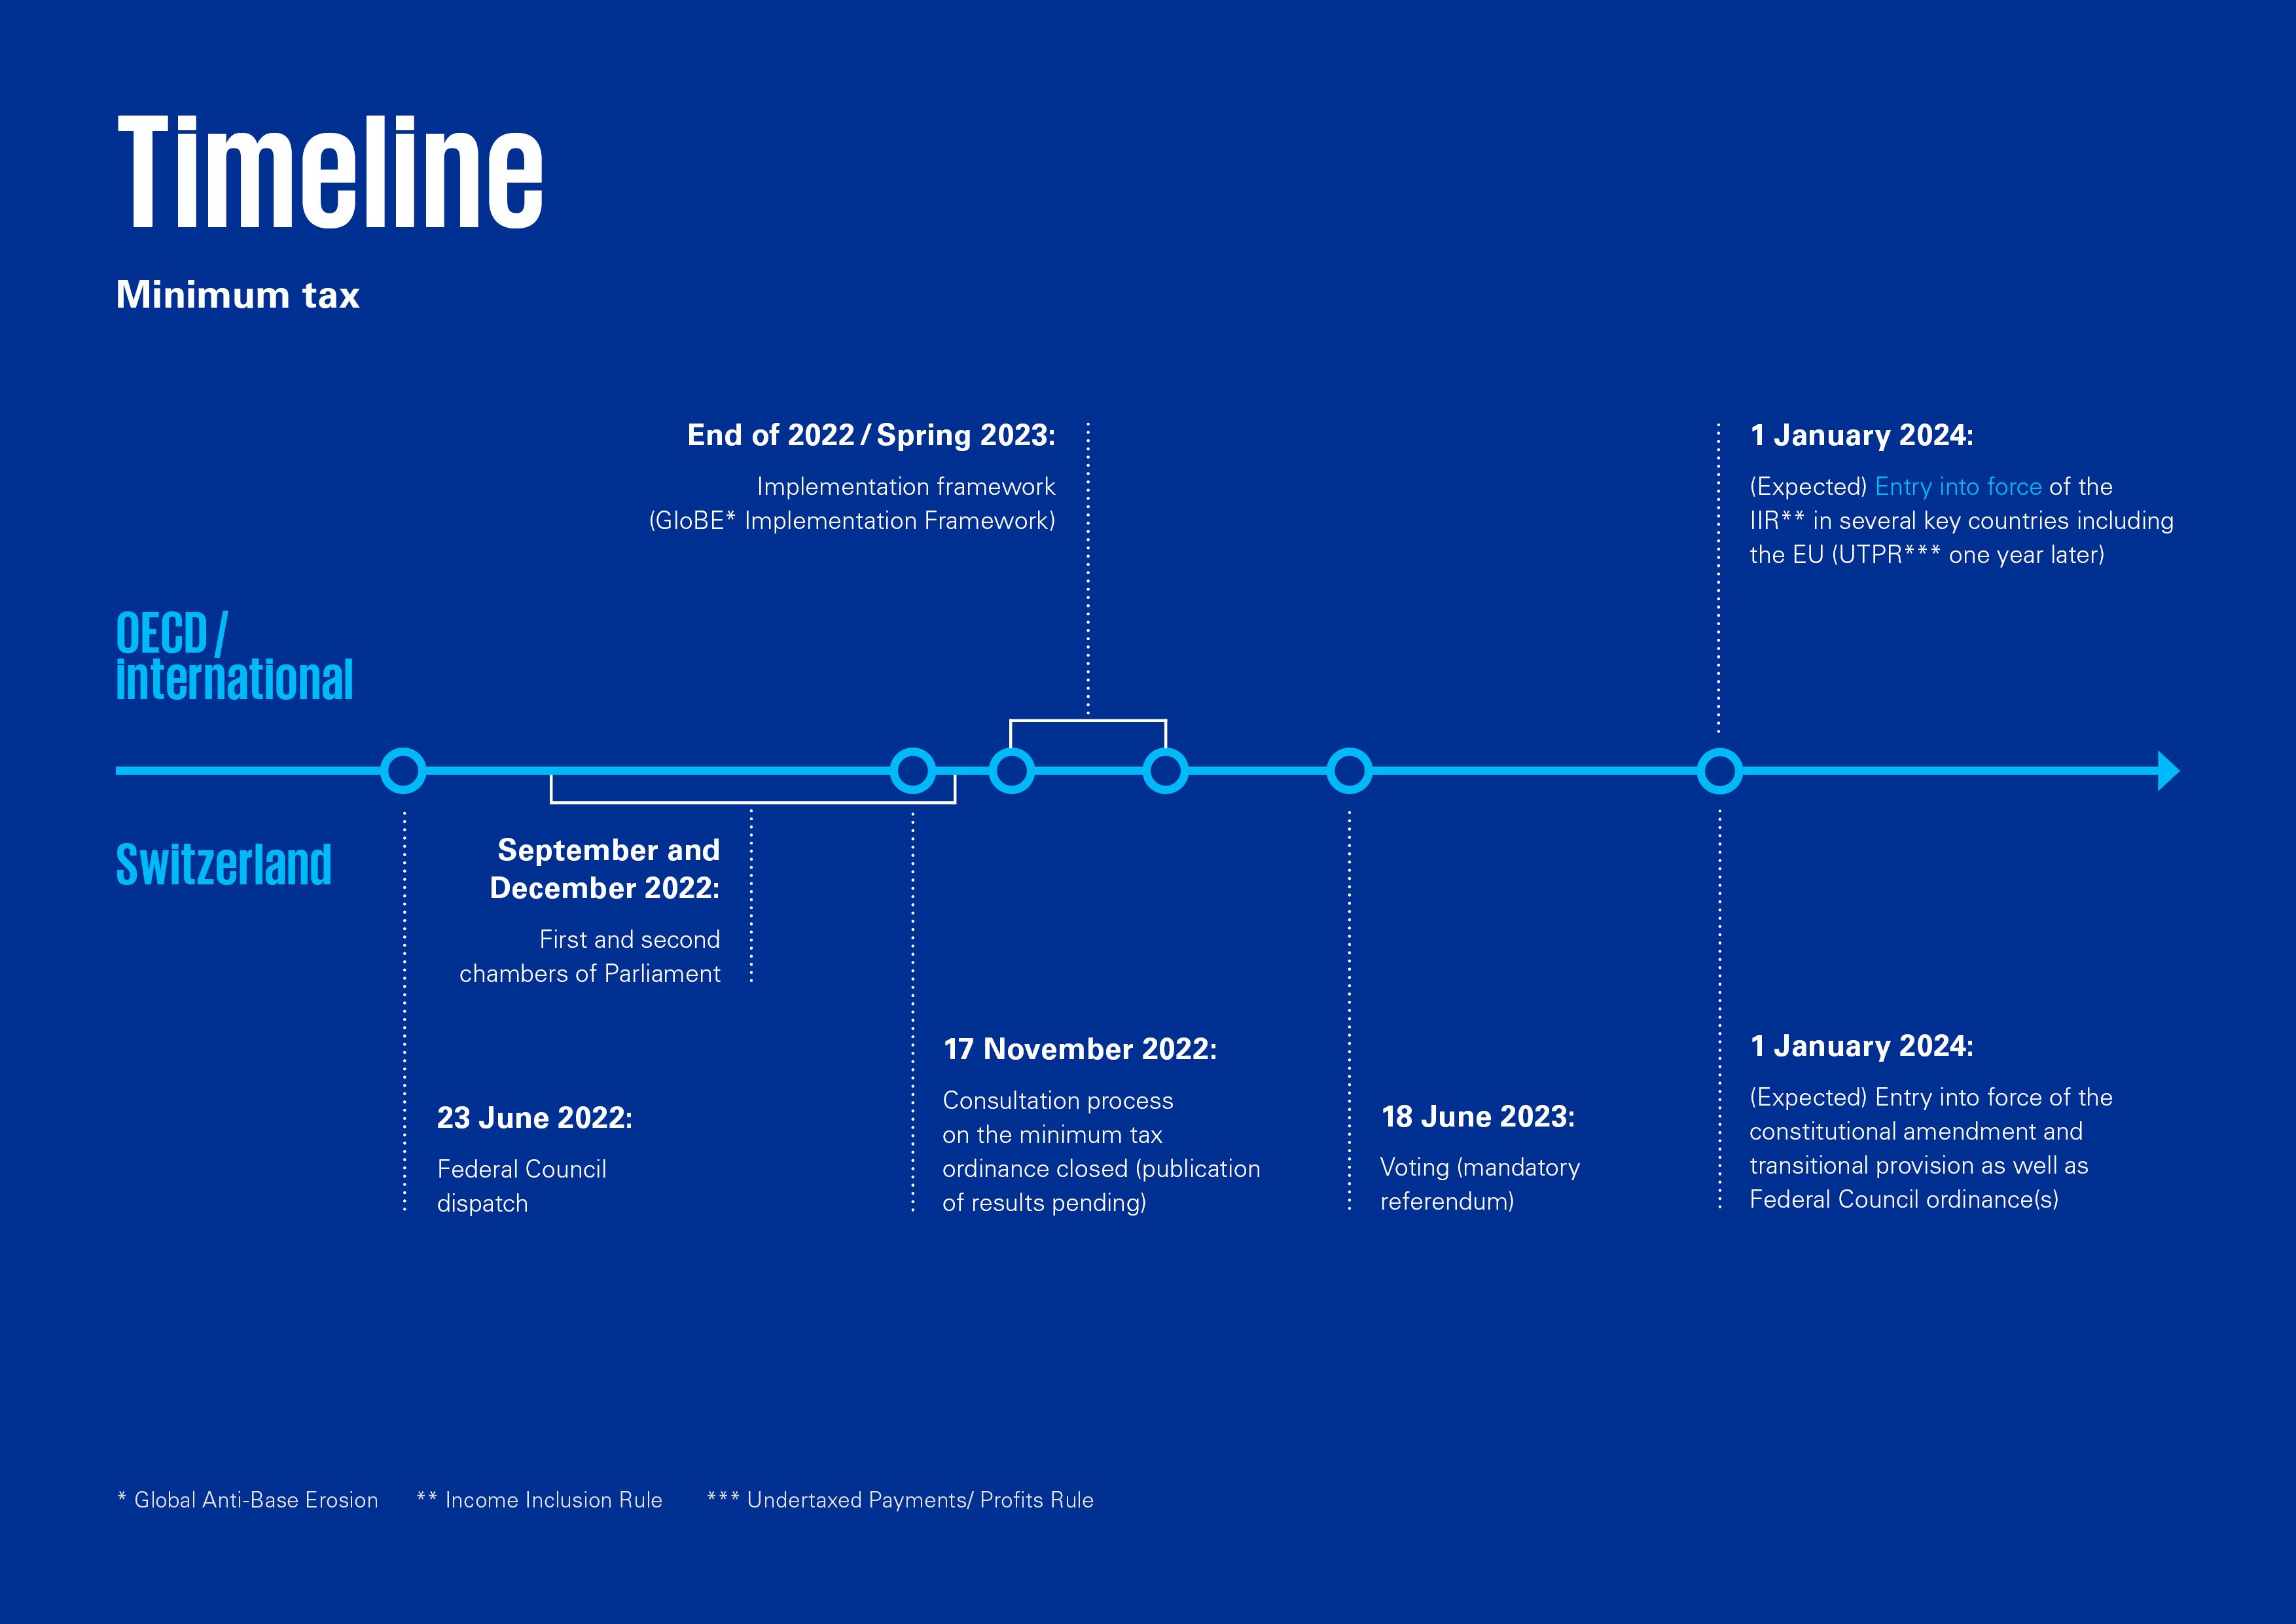 Swiss and OECD timeline for Pillar 2